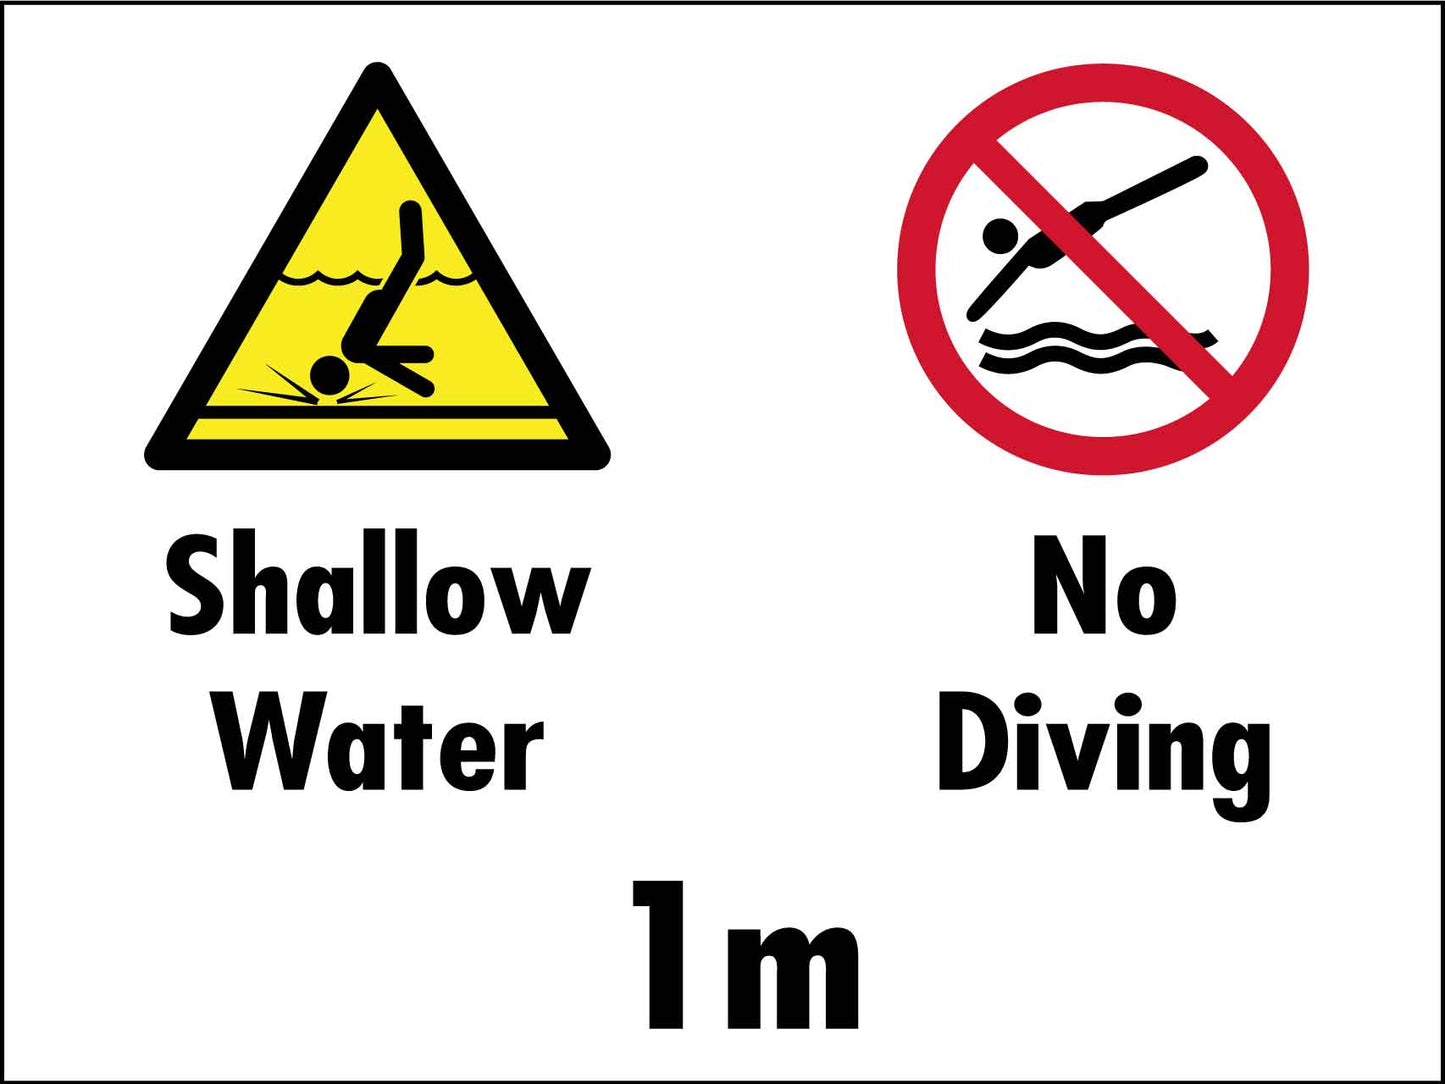 Shallow Water No Diving 1m Sign